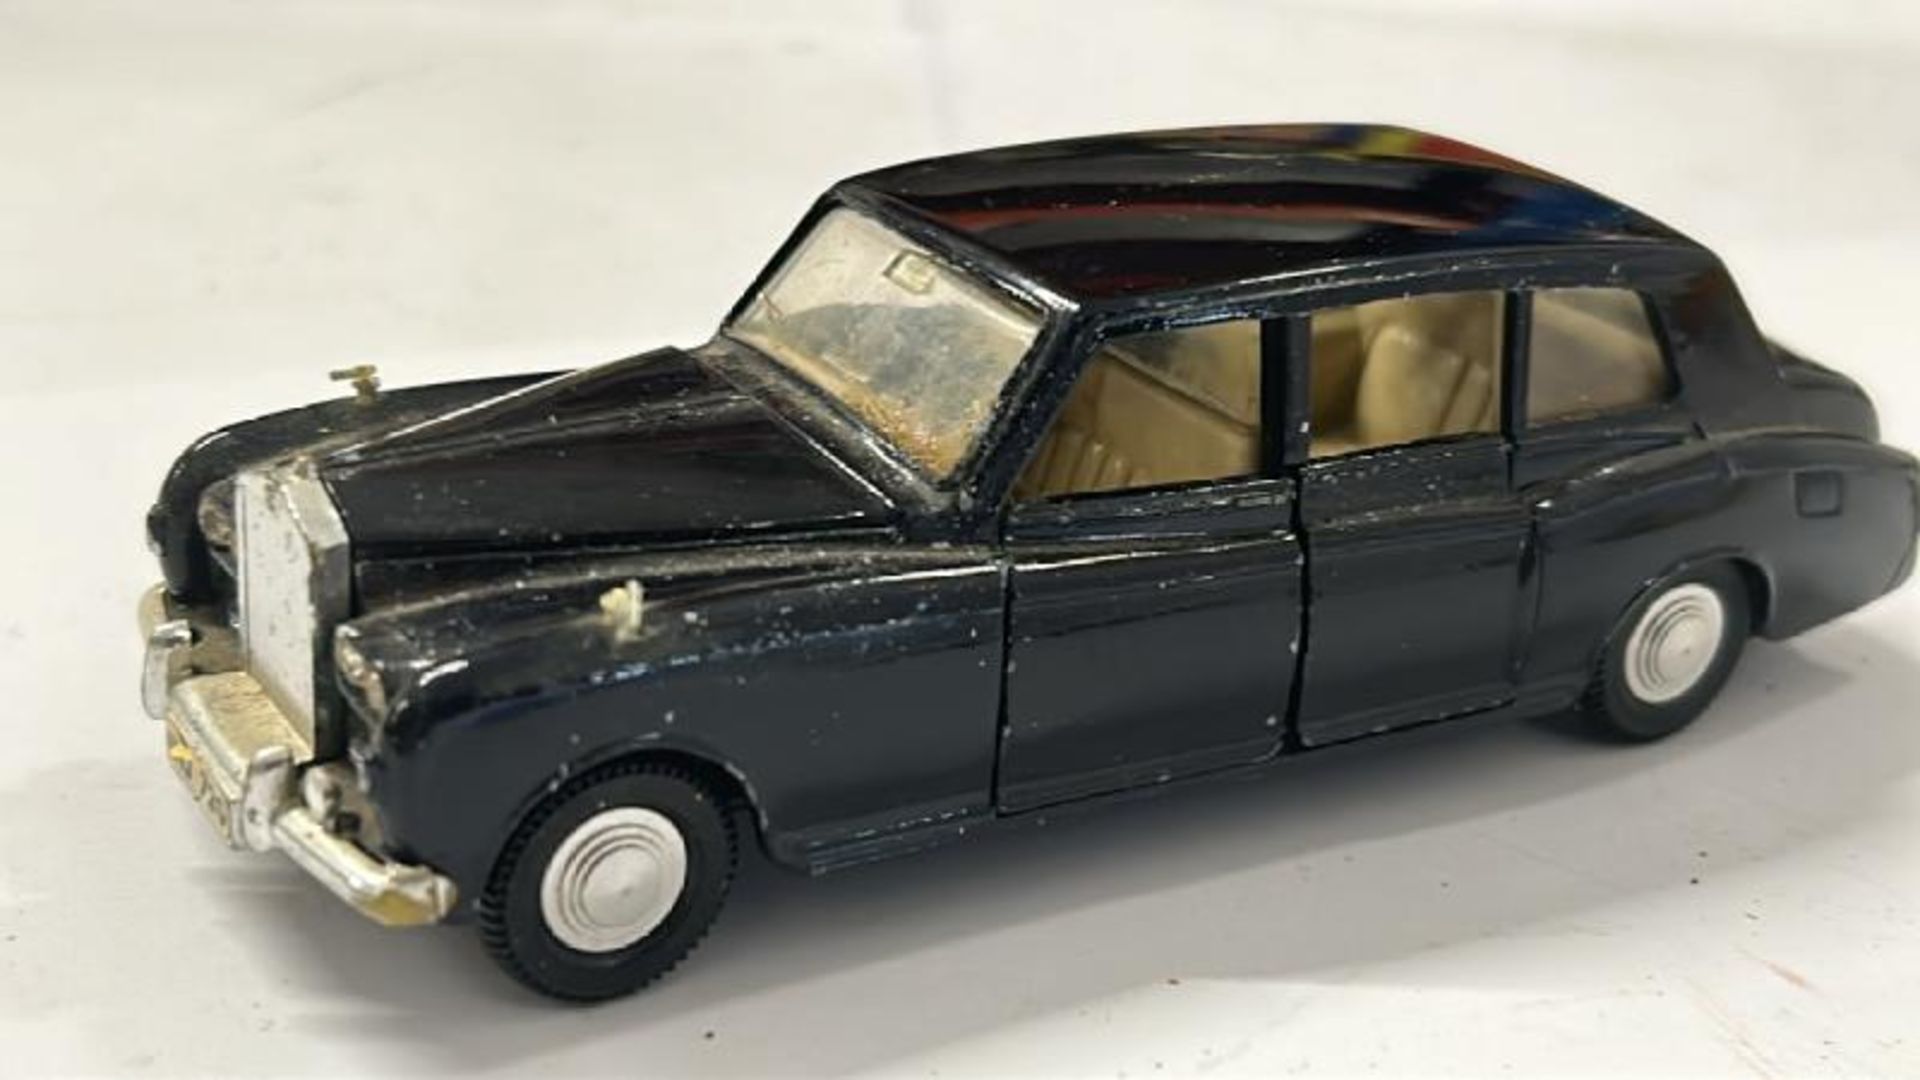 Unboxed Dinky & Corgi cars and caravans including Corgi Silver Shadow Rolls Royce and Dinky Rolls - Image 10 of 23